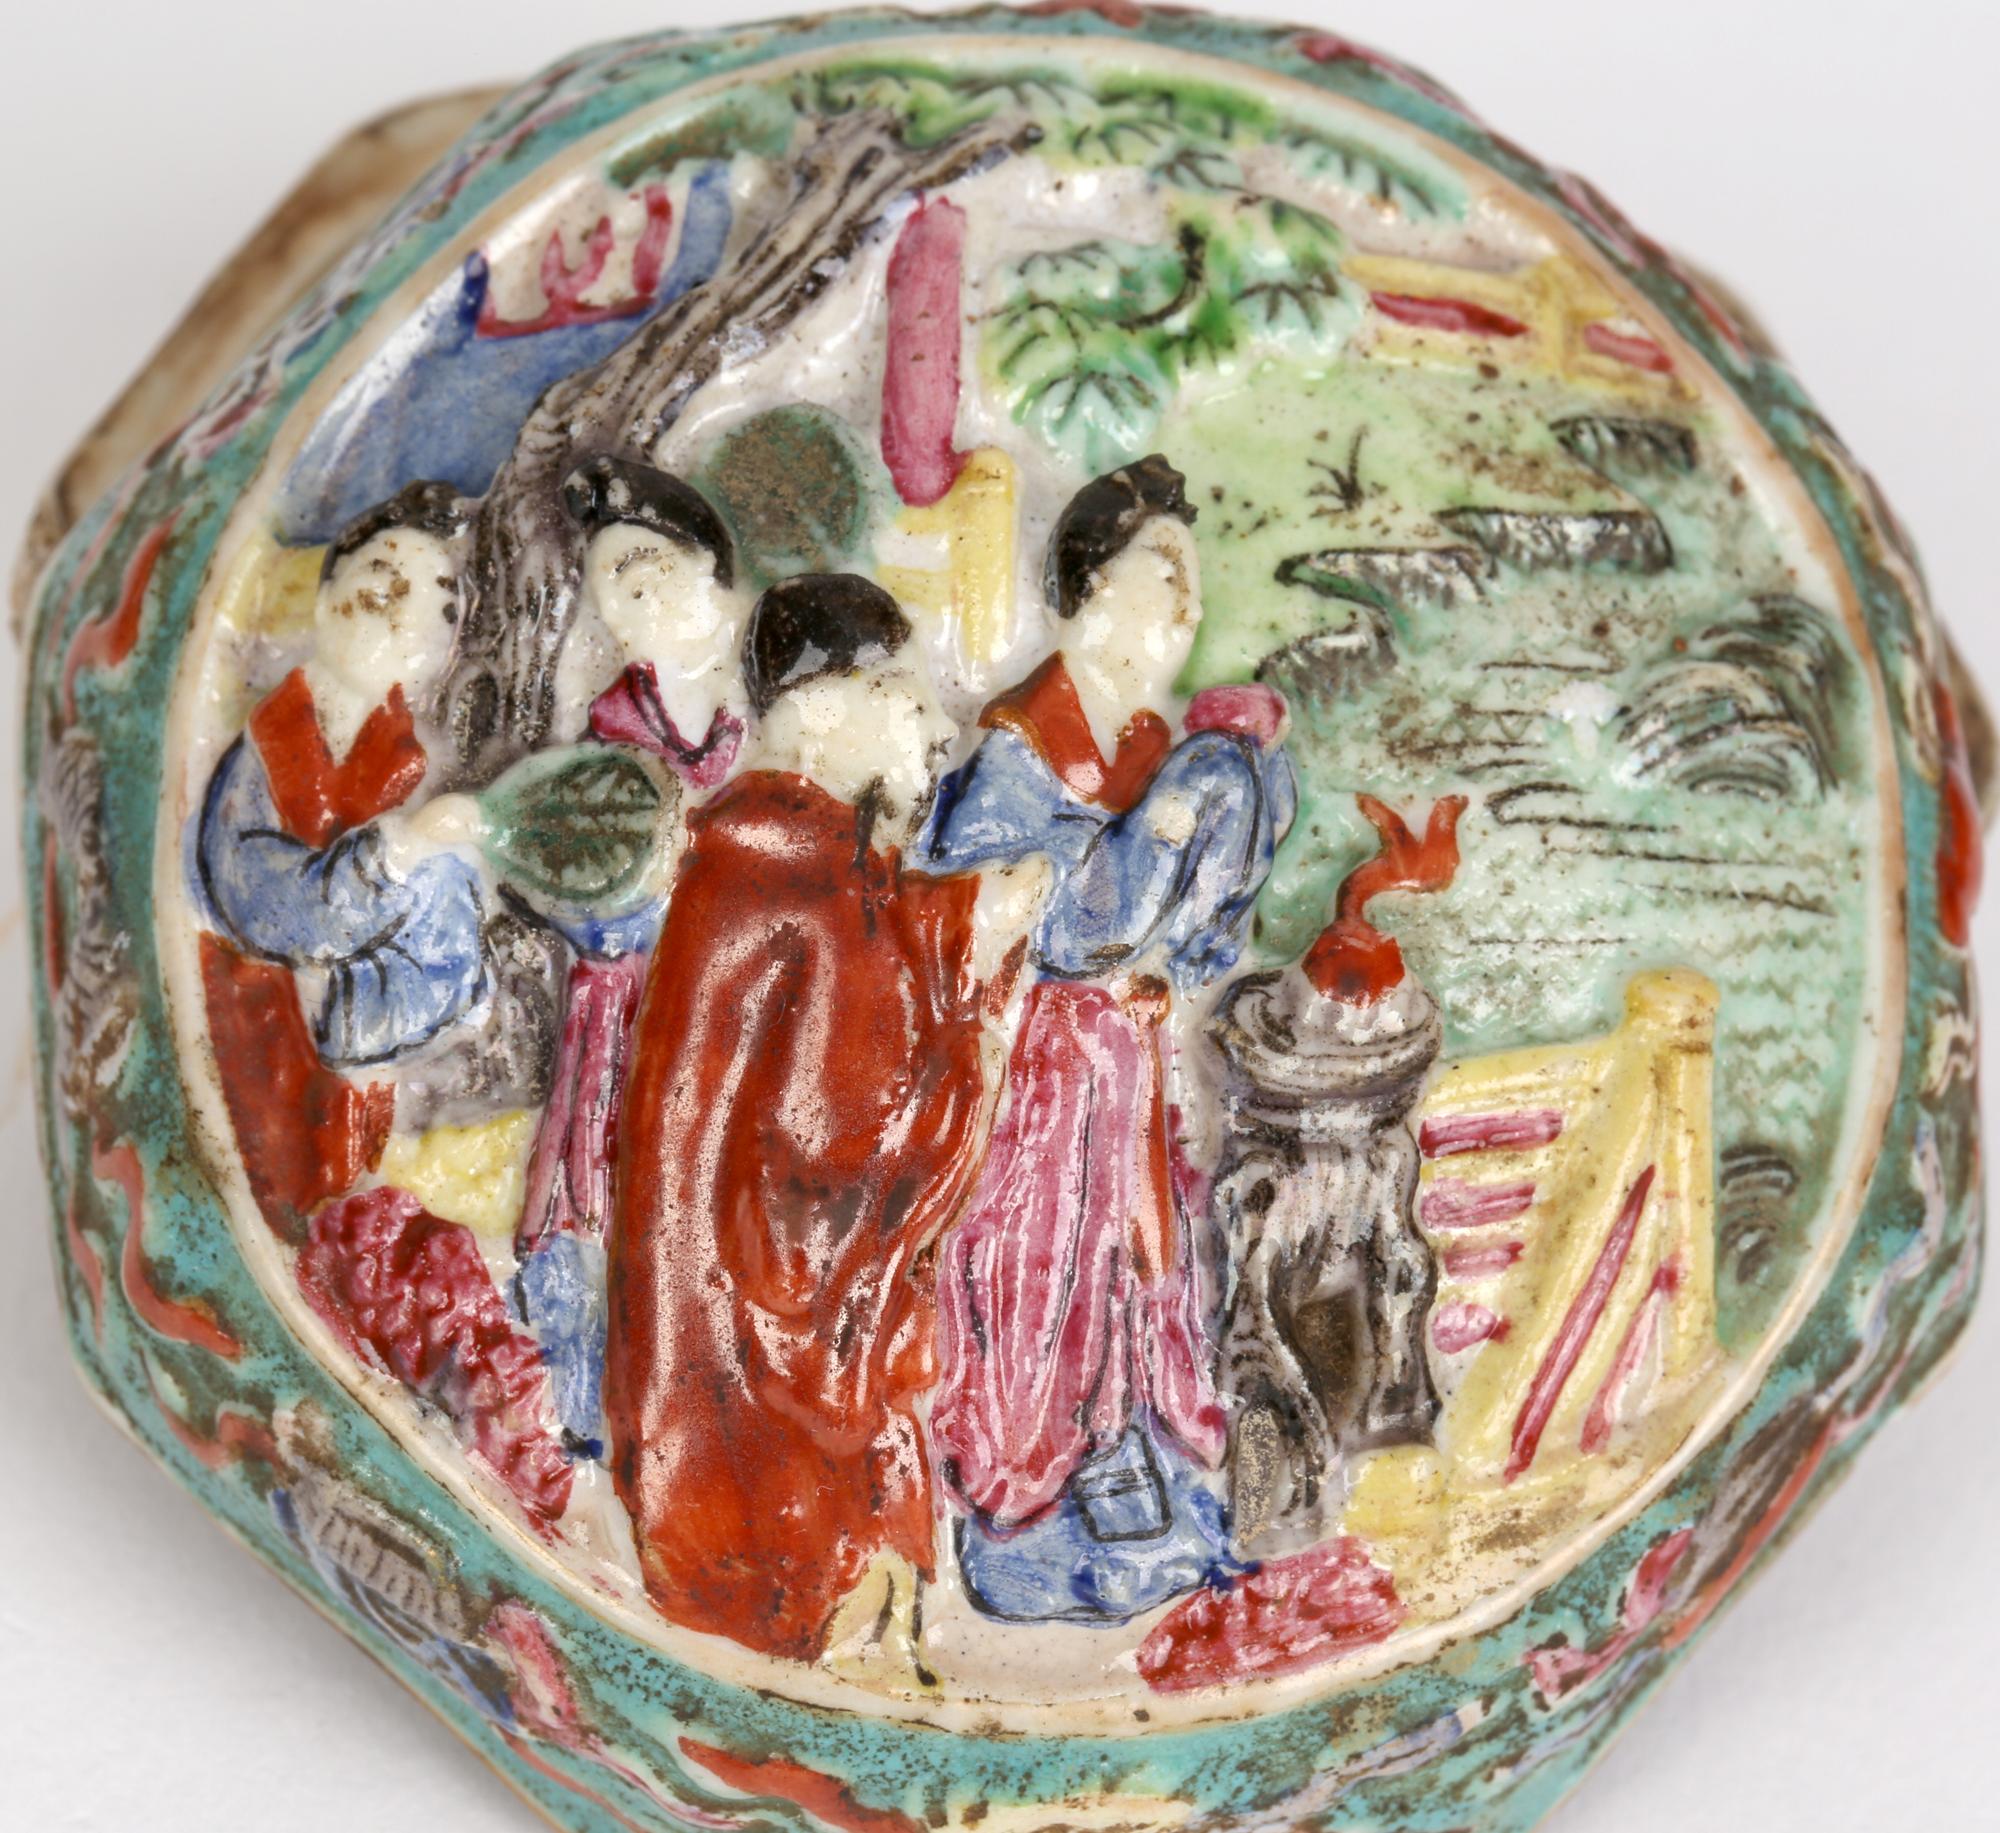 A stylish Antique Chinese Qing hexagonal shaped porcelain lidded box decorated in relief with figures and other Chinese symbols dating from the 19th century. The box stands on a rounded base the lower body relief molded with bats amidst flower